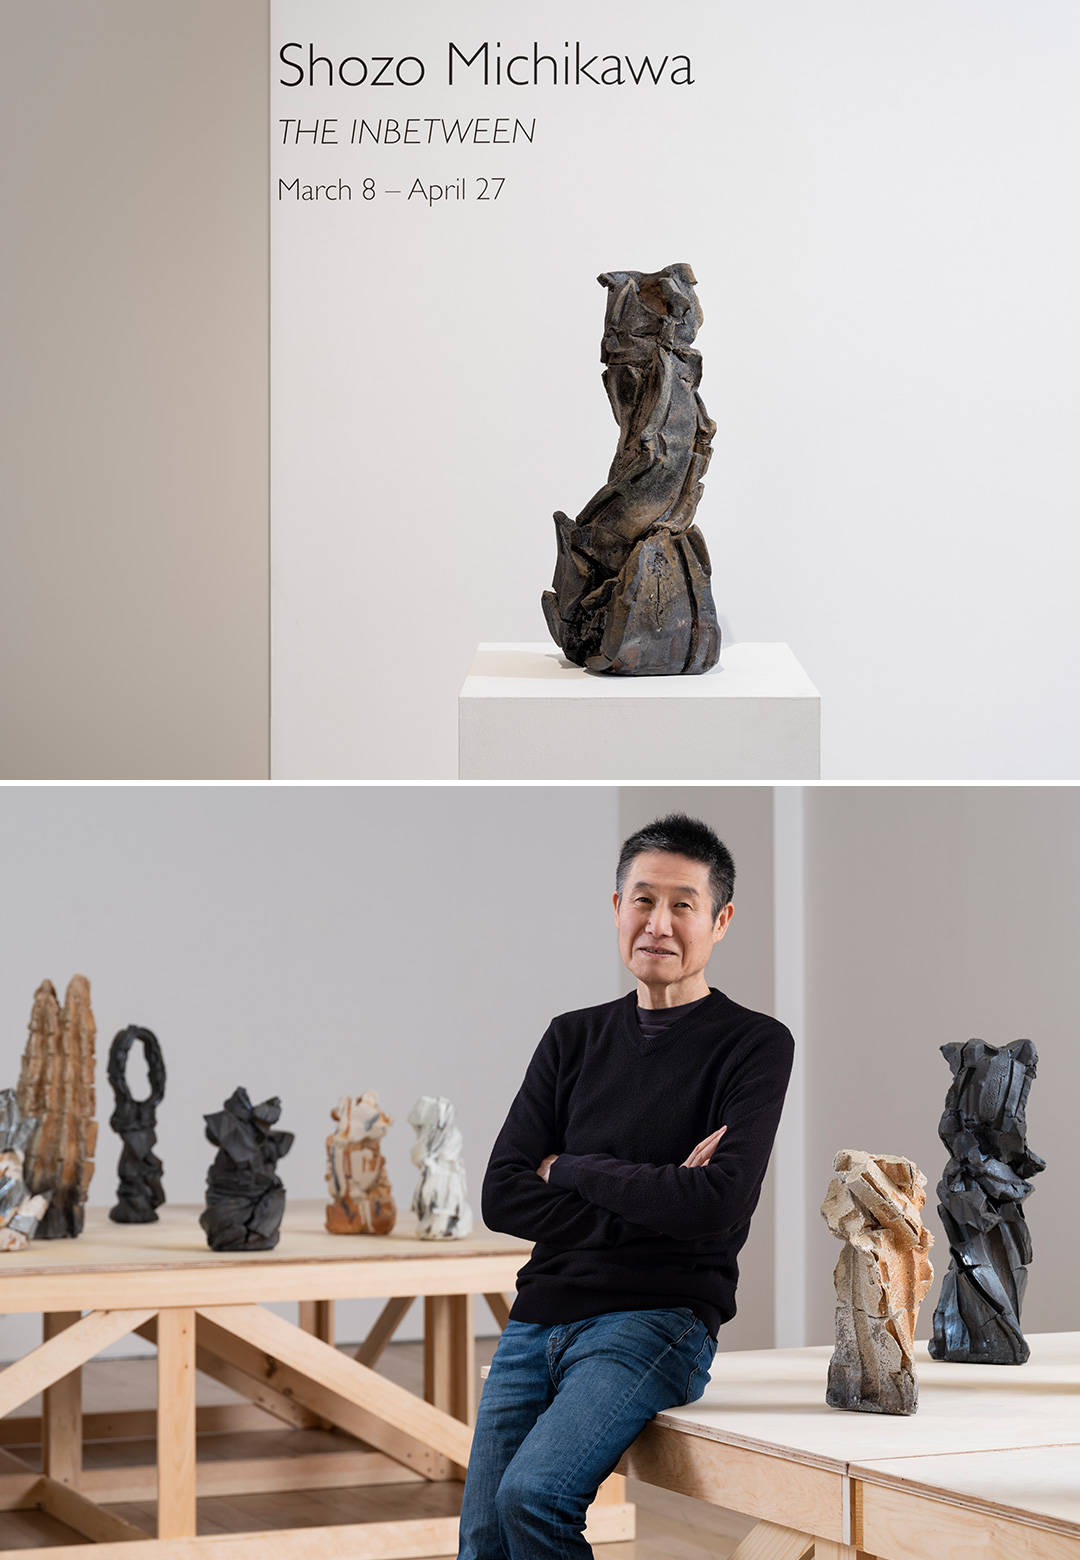 Shozo Michikawa’s ‘THE INBETWEEN’ traces nature’s contrasts with ceramic